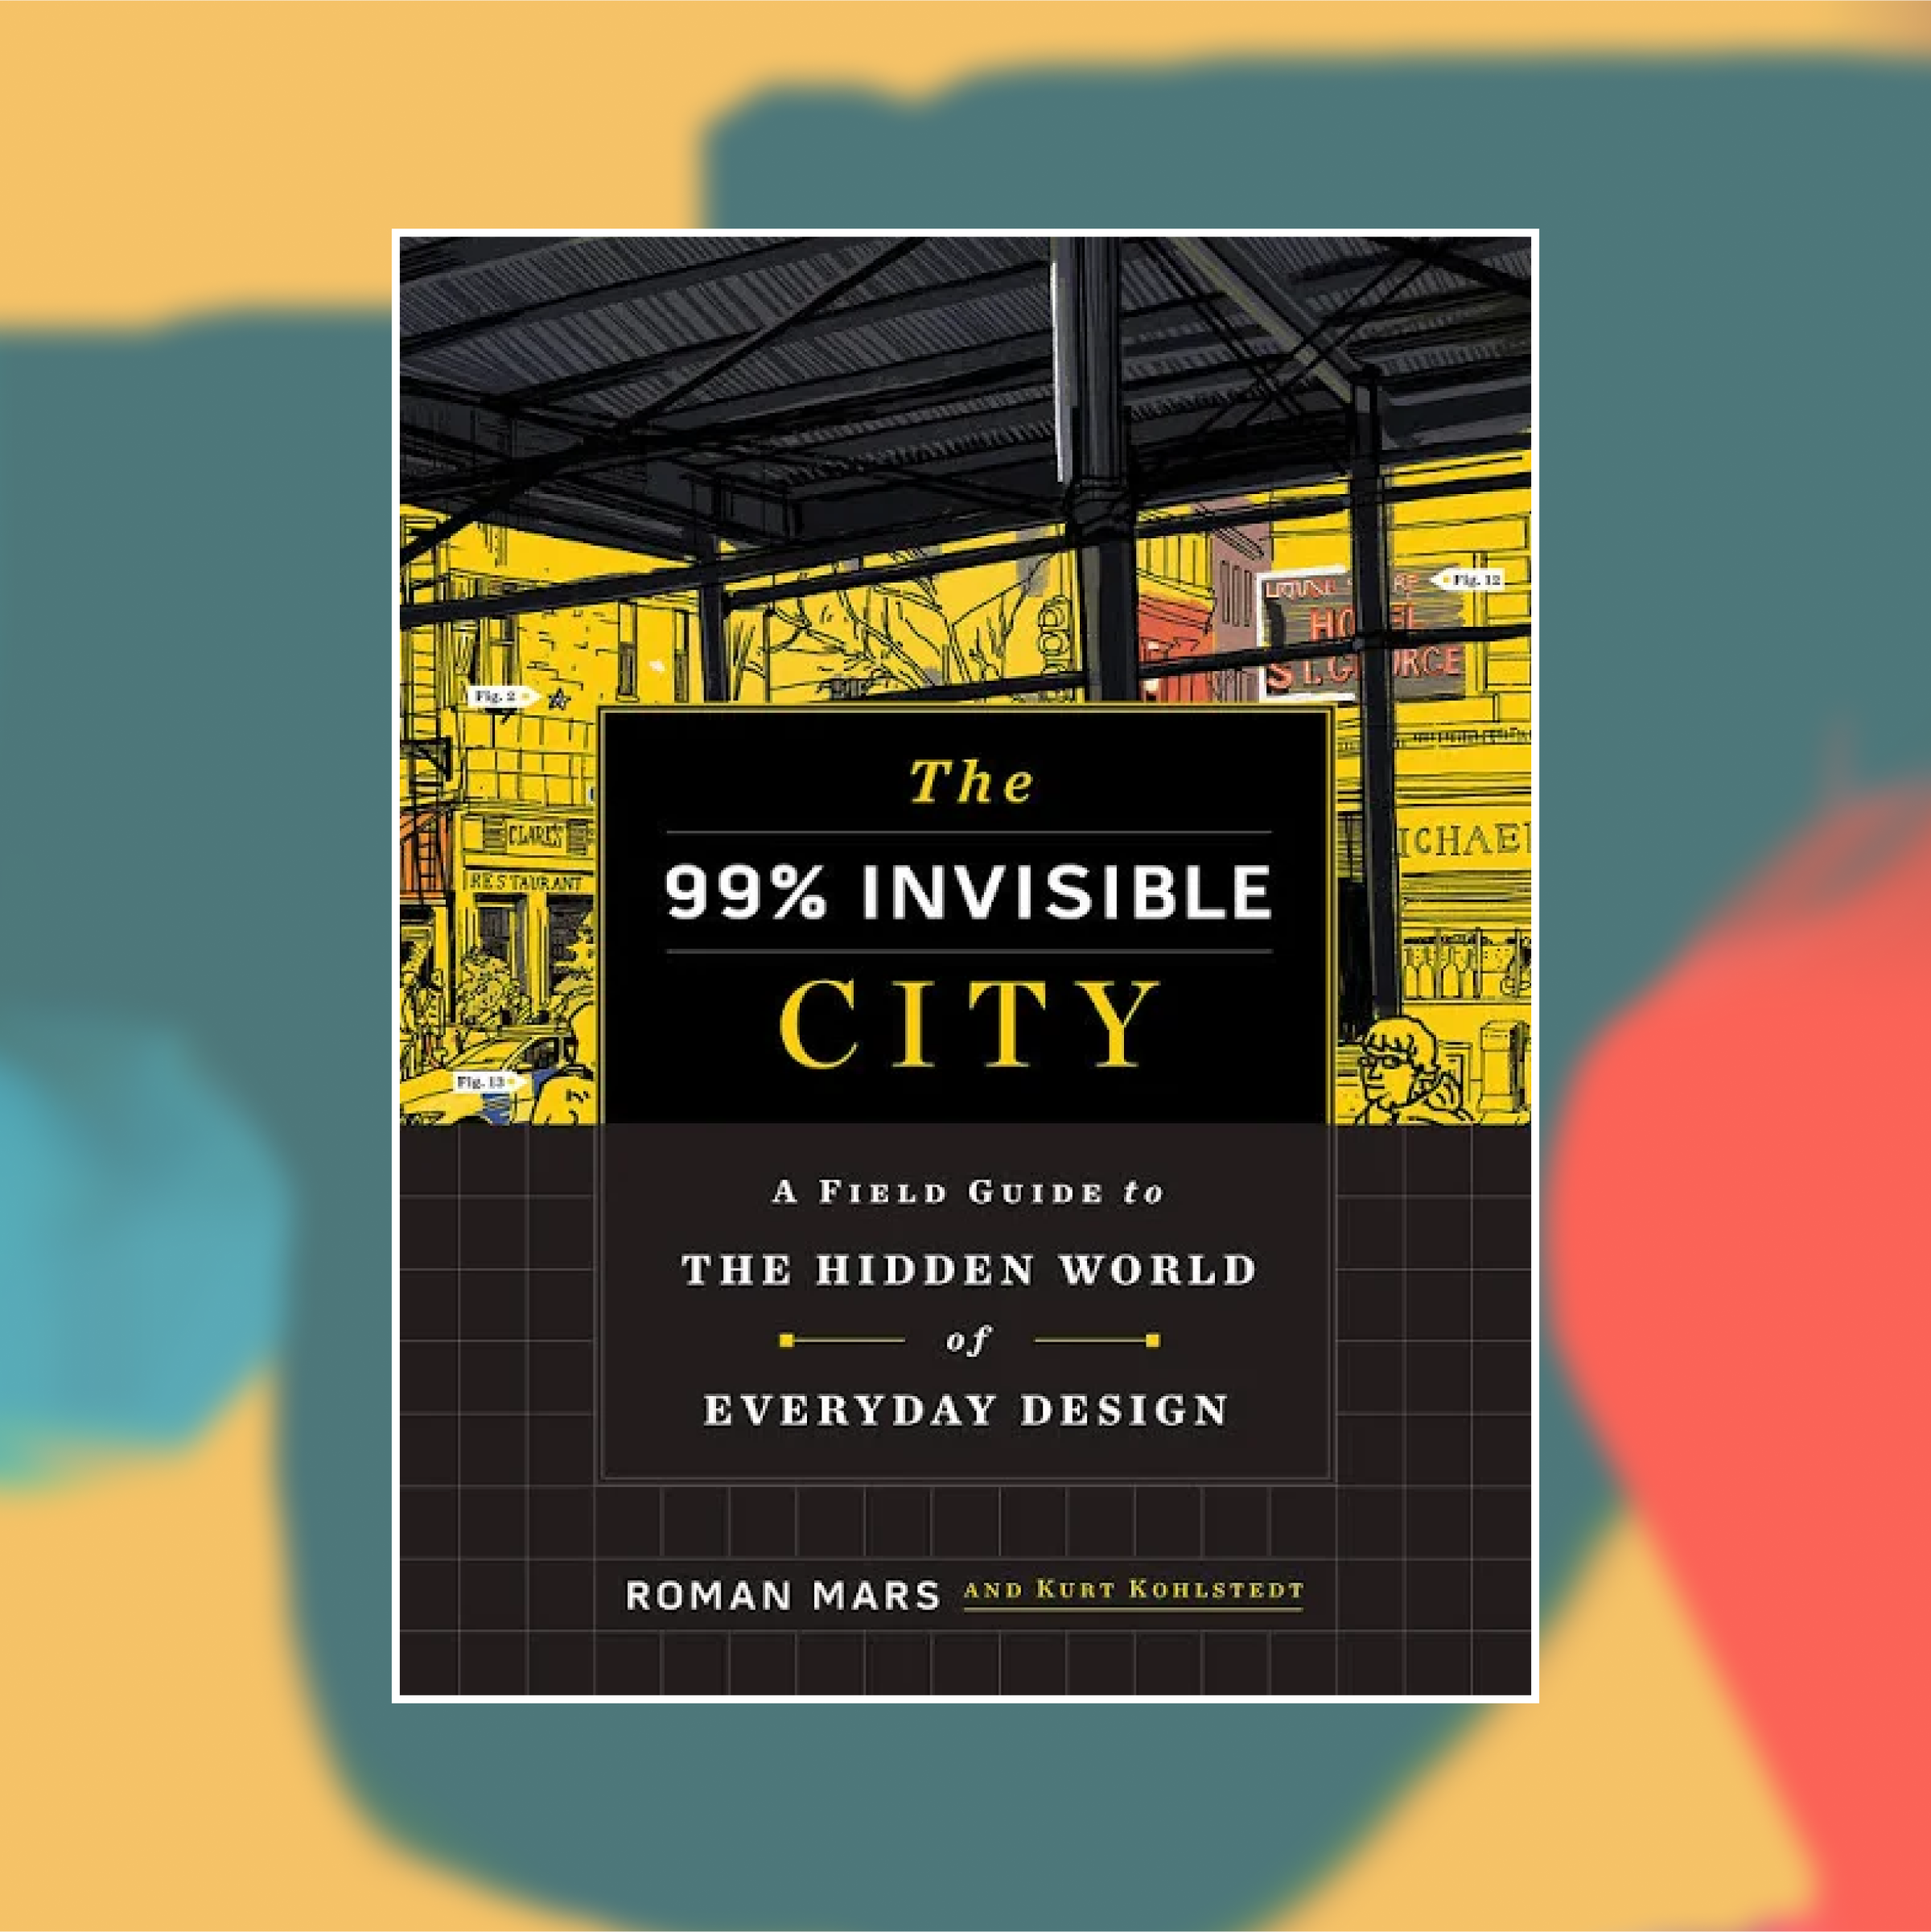 Book cover of 99% Invisible City against an abstract painted background